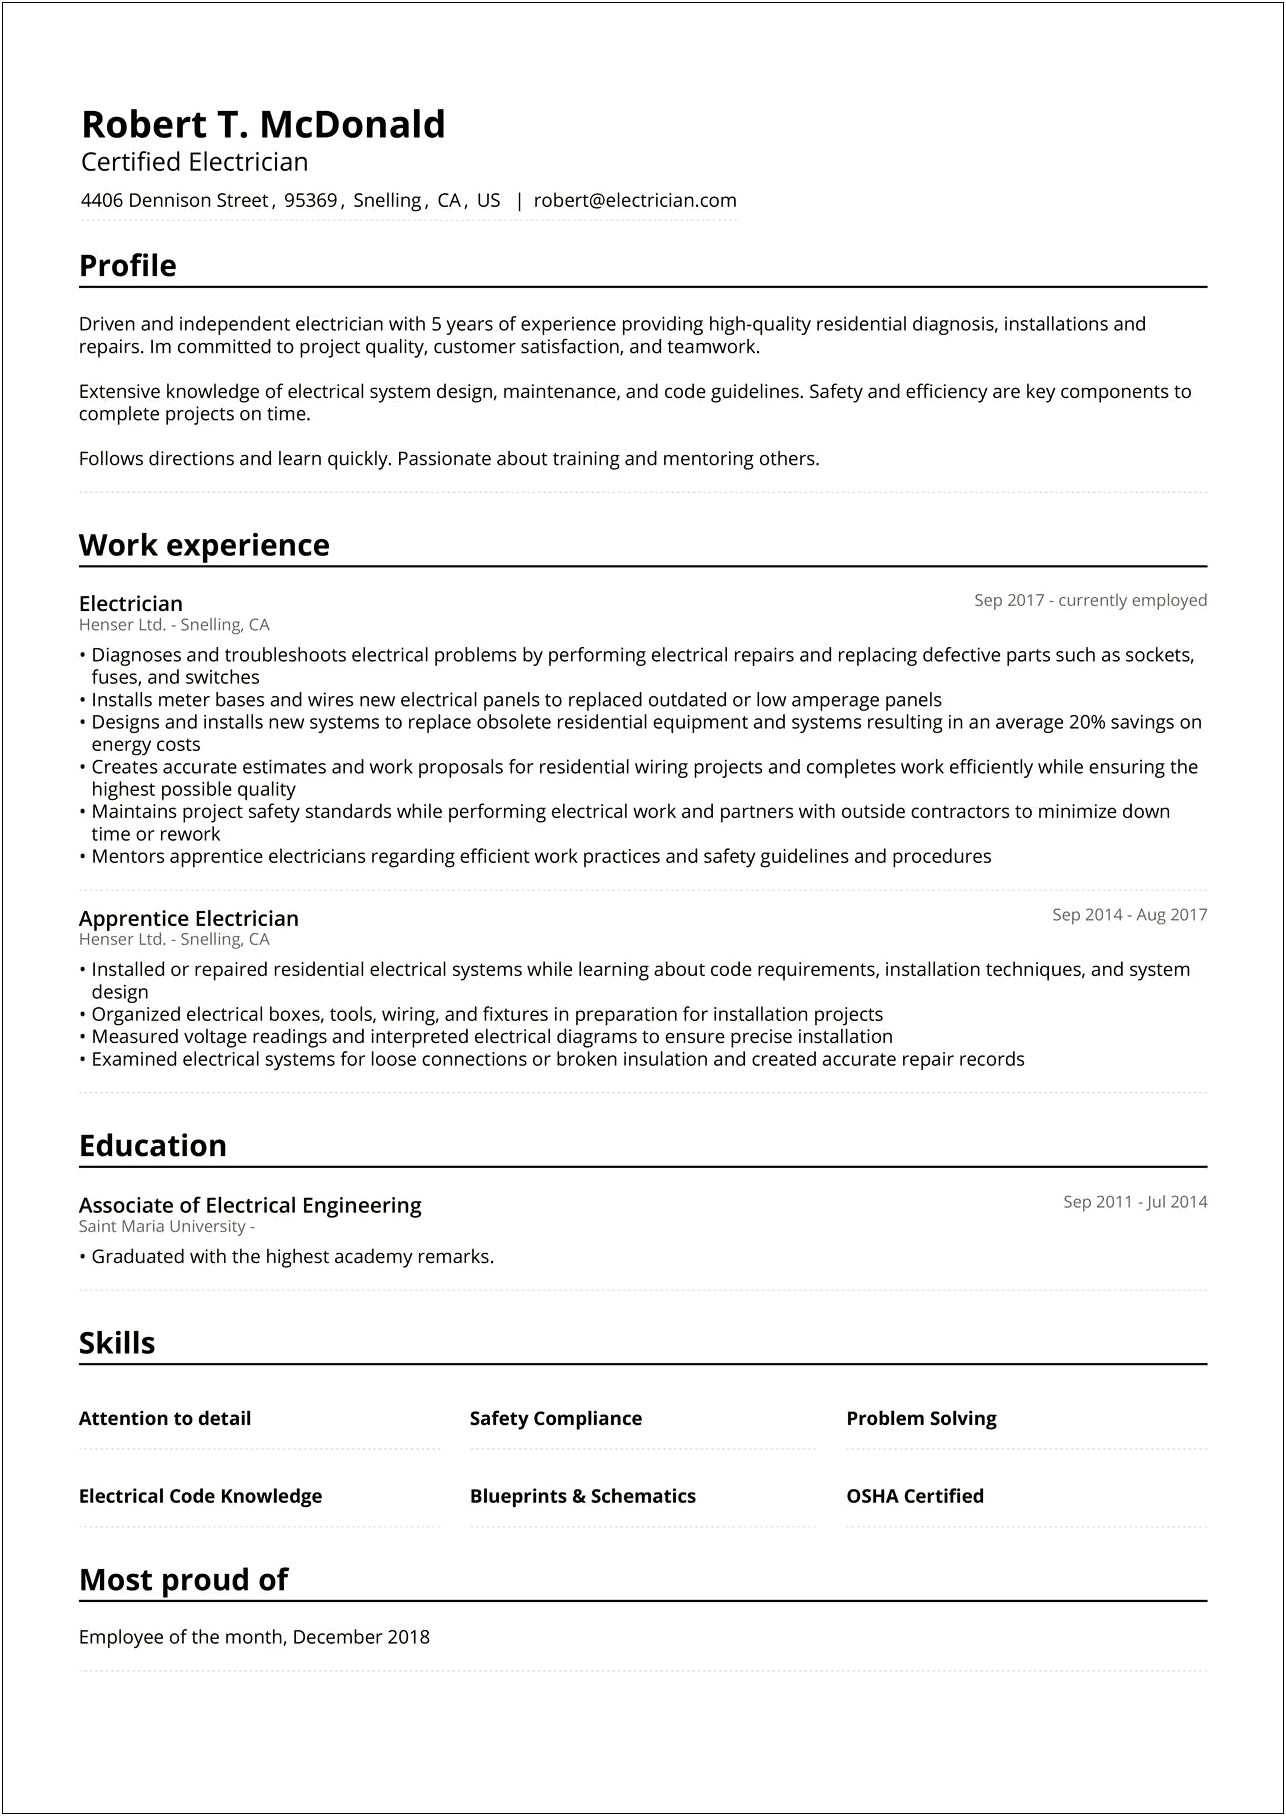 Resume Examples For Limited Work Experience